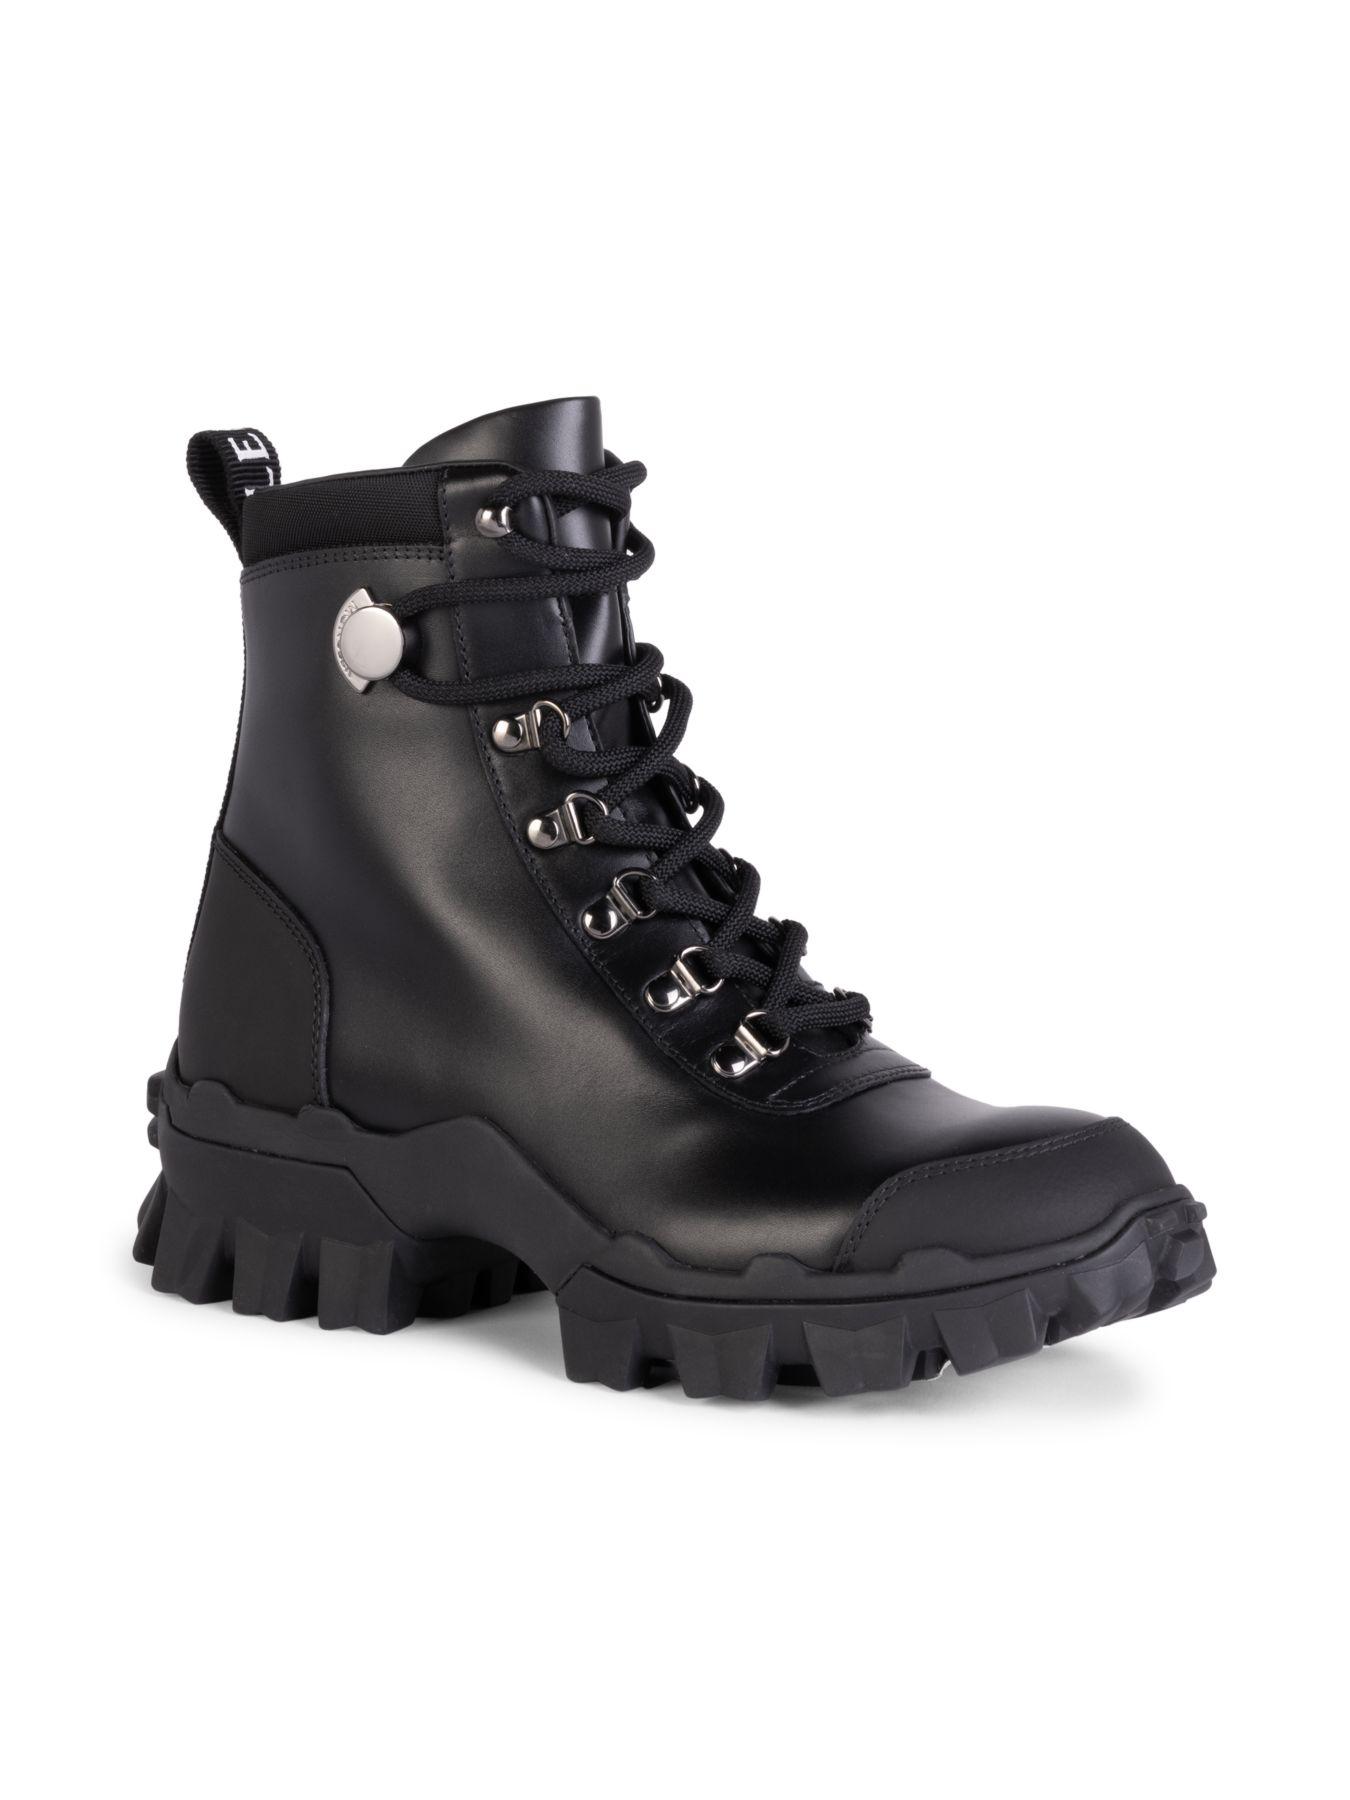 Moncler Helis Leather Hiking Boots in Black - Lyst